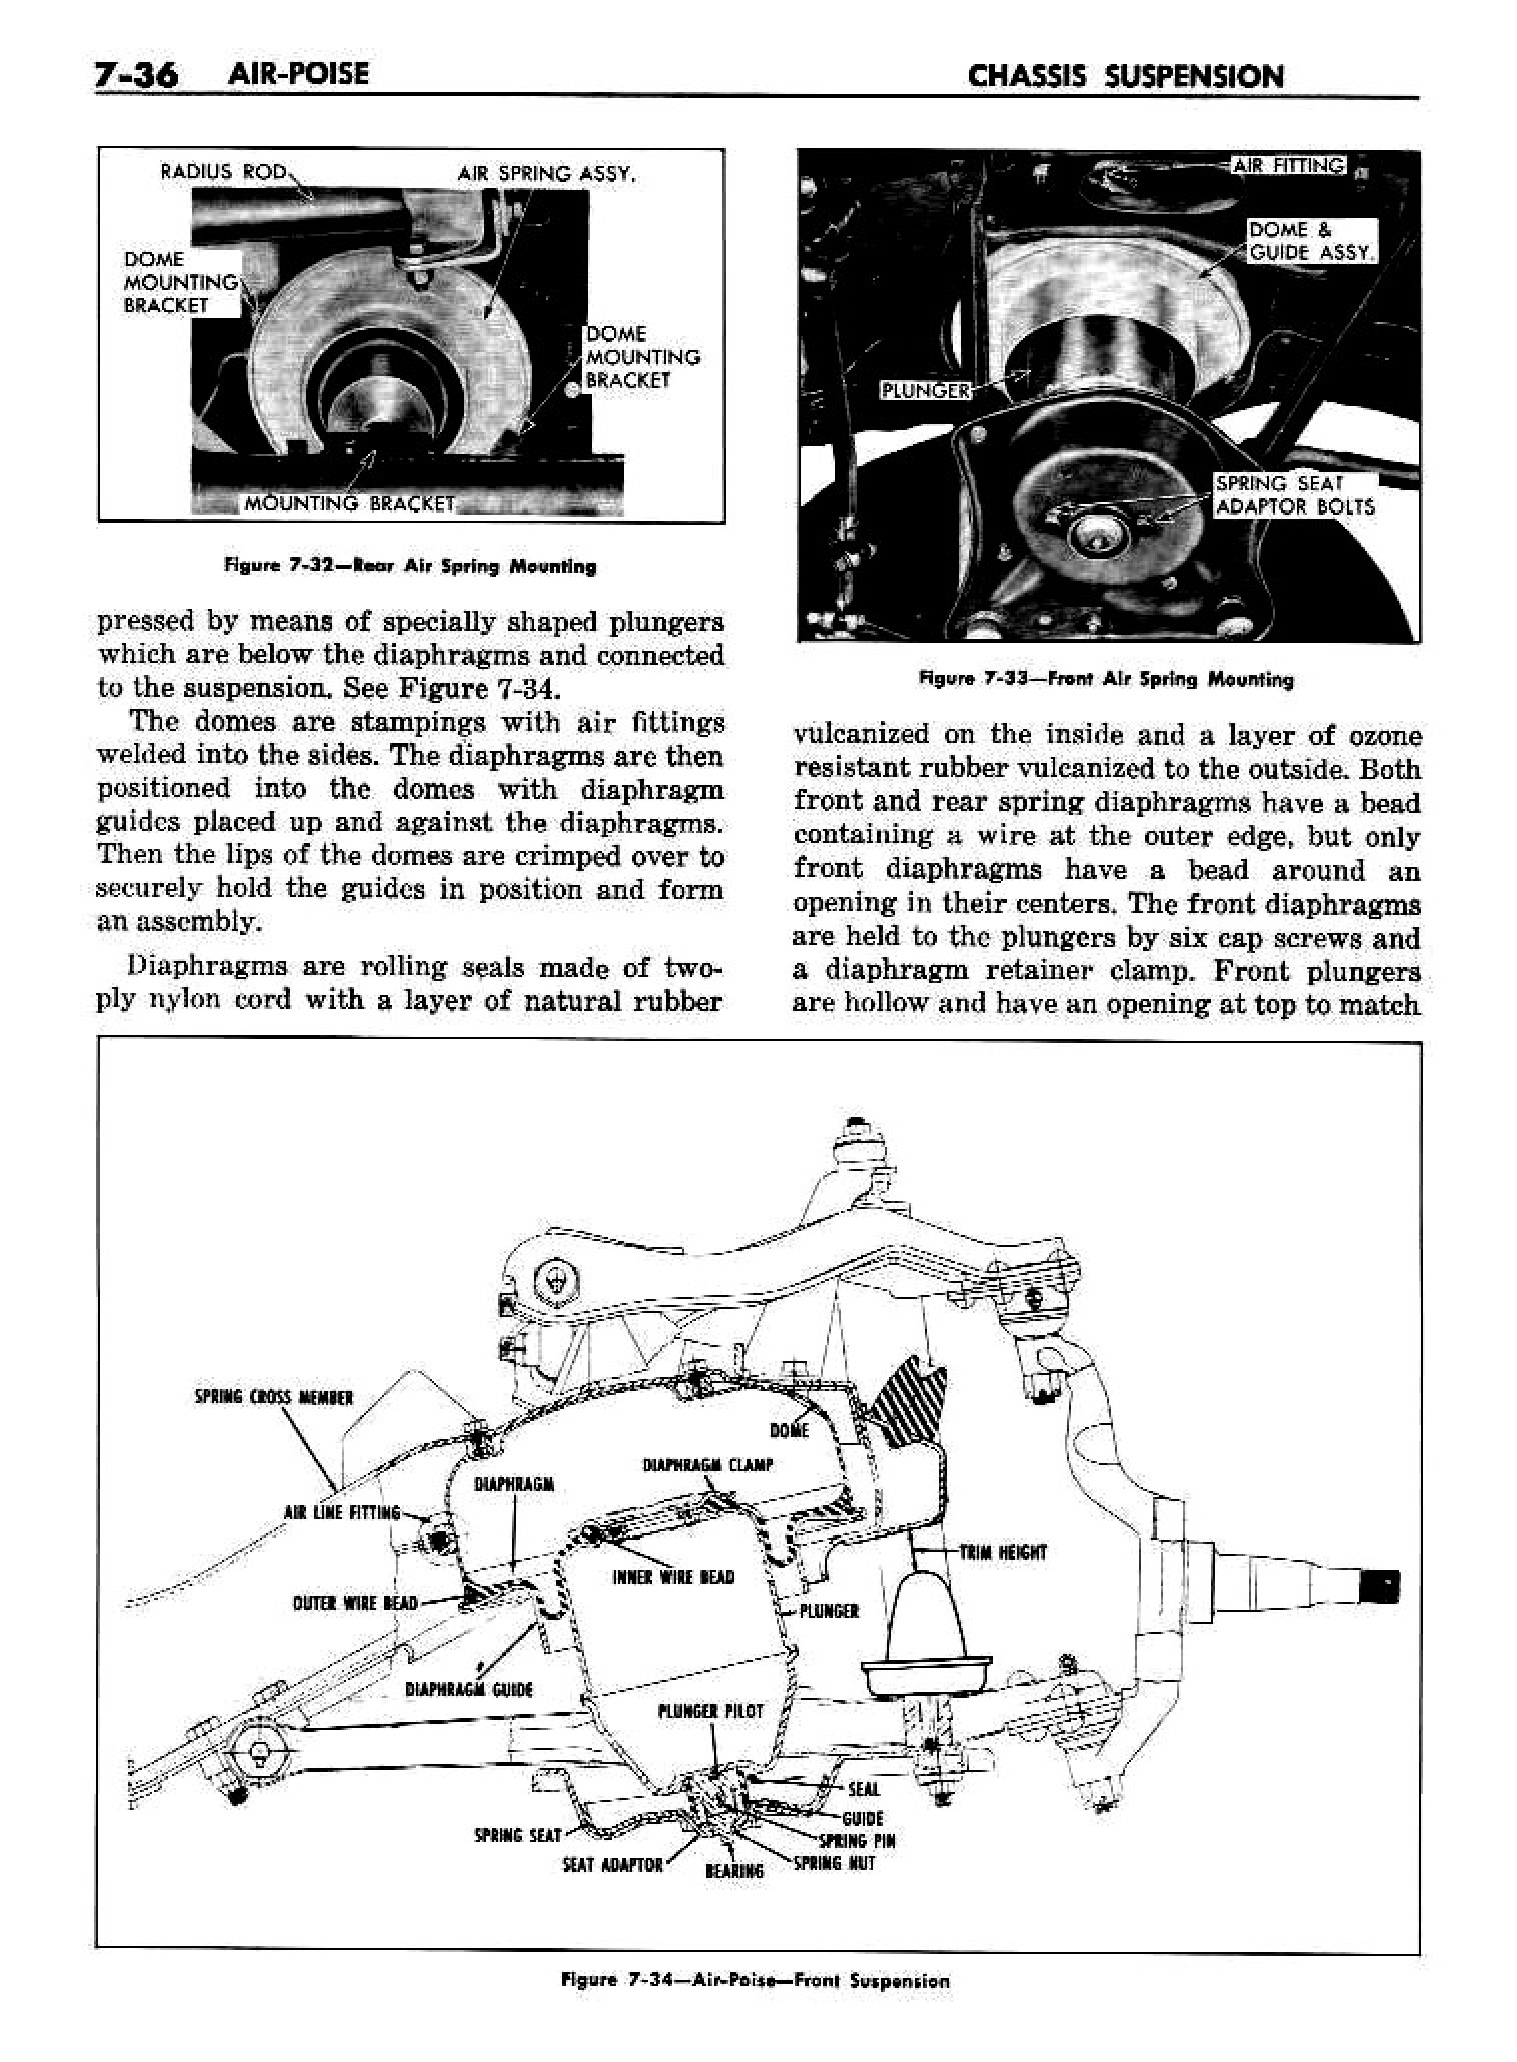 n_08 1958 Buick Shop Manual - Chassis Suspension_36.jpg